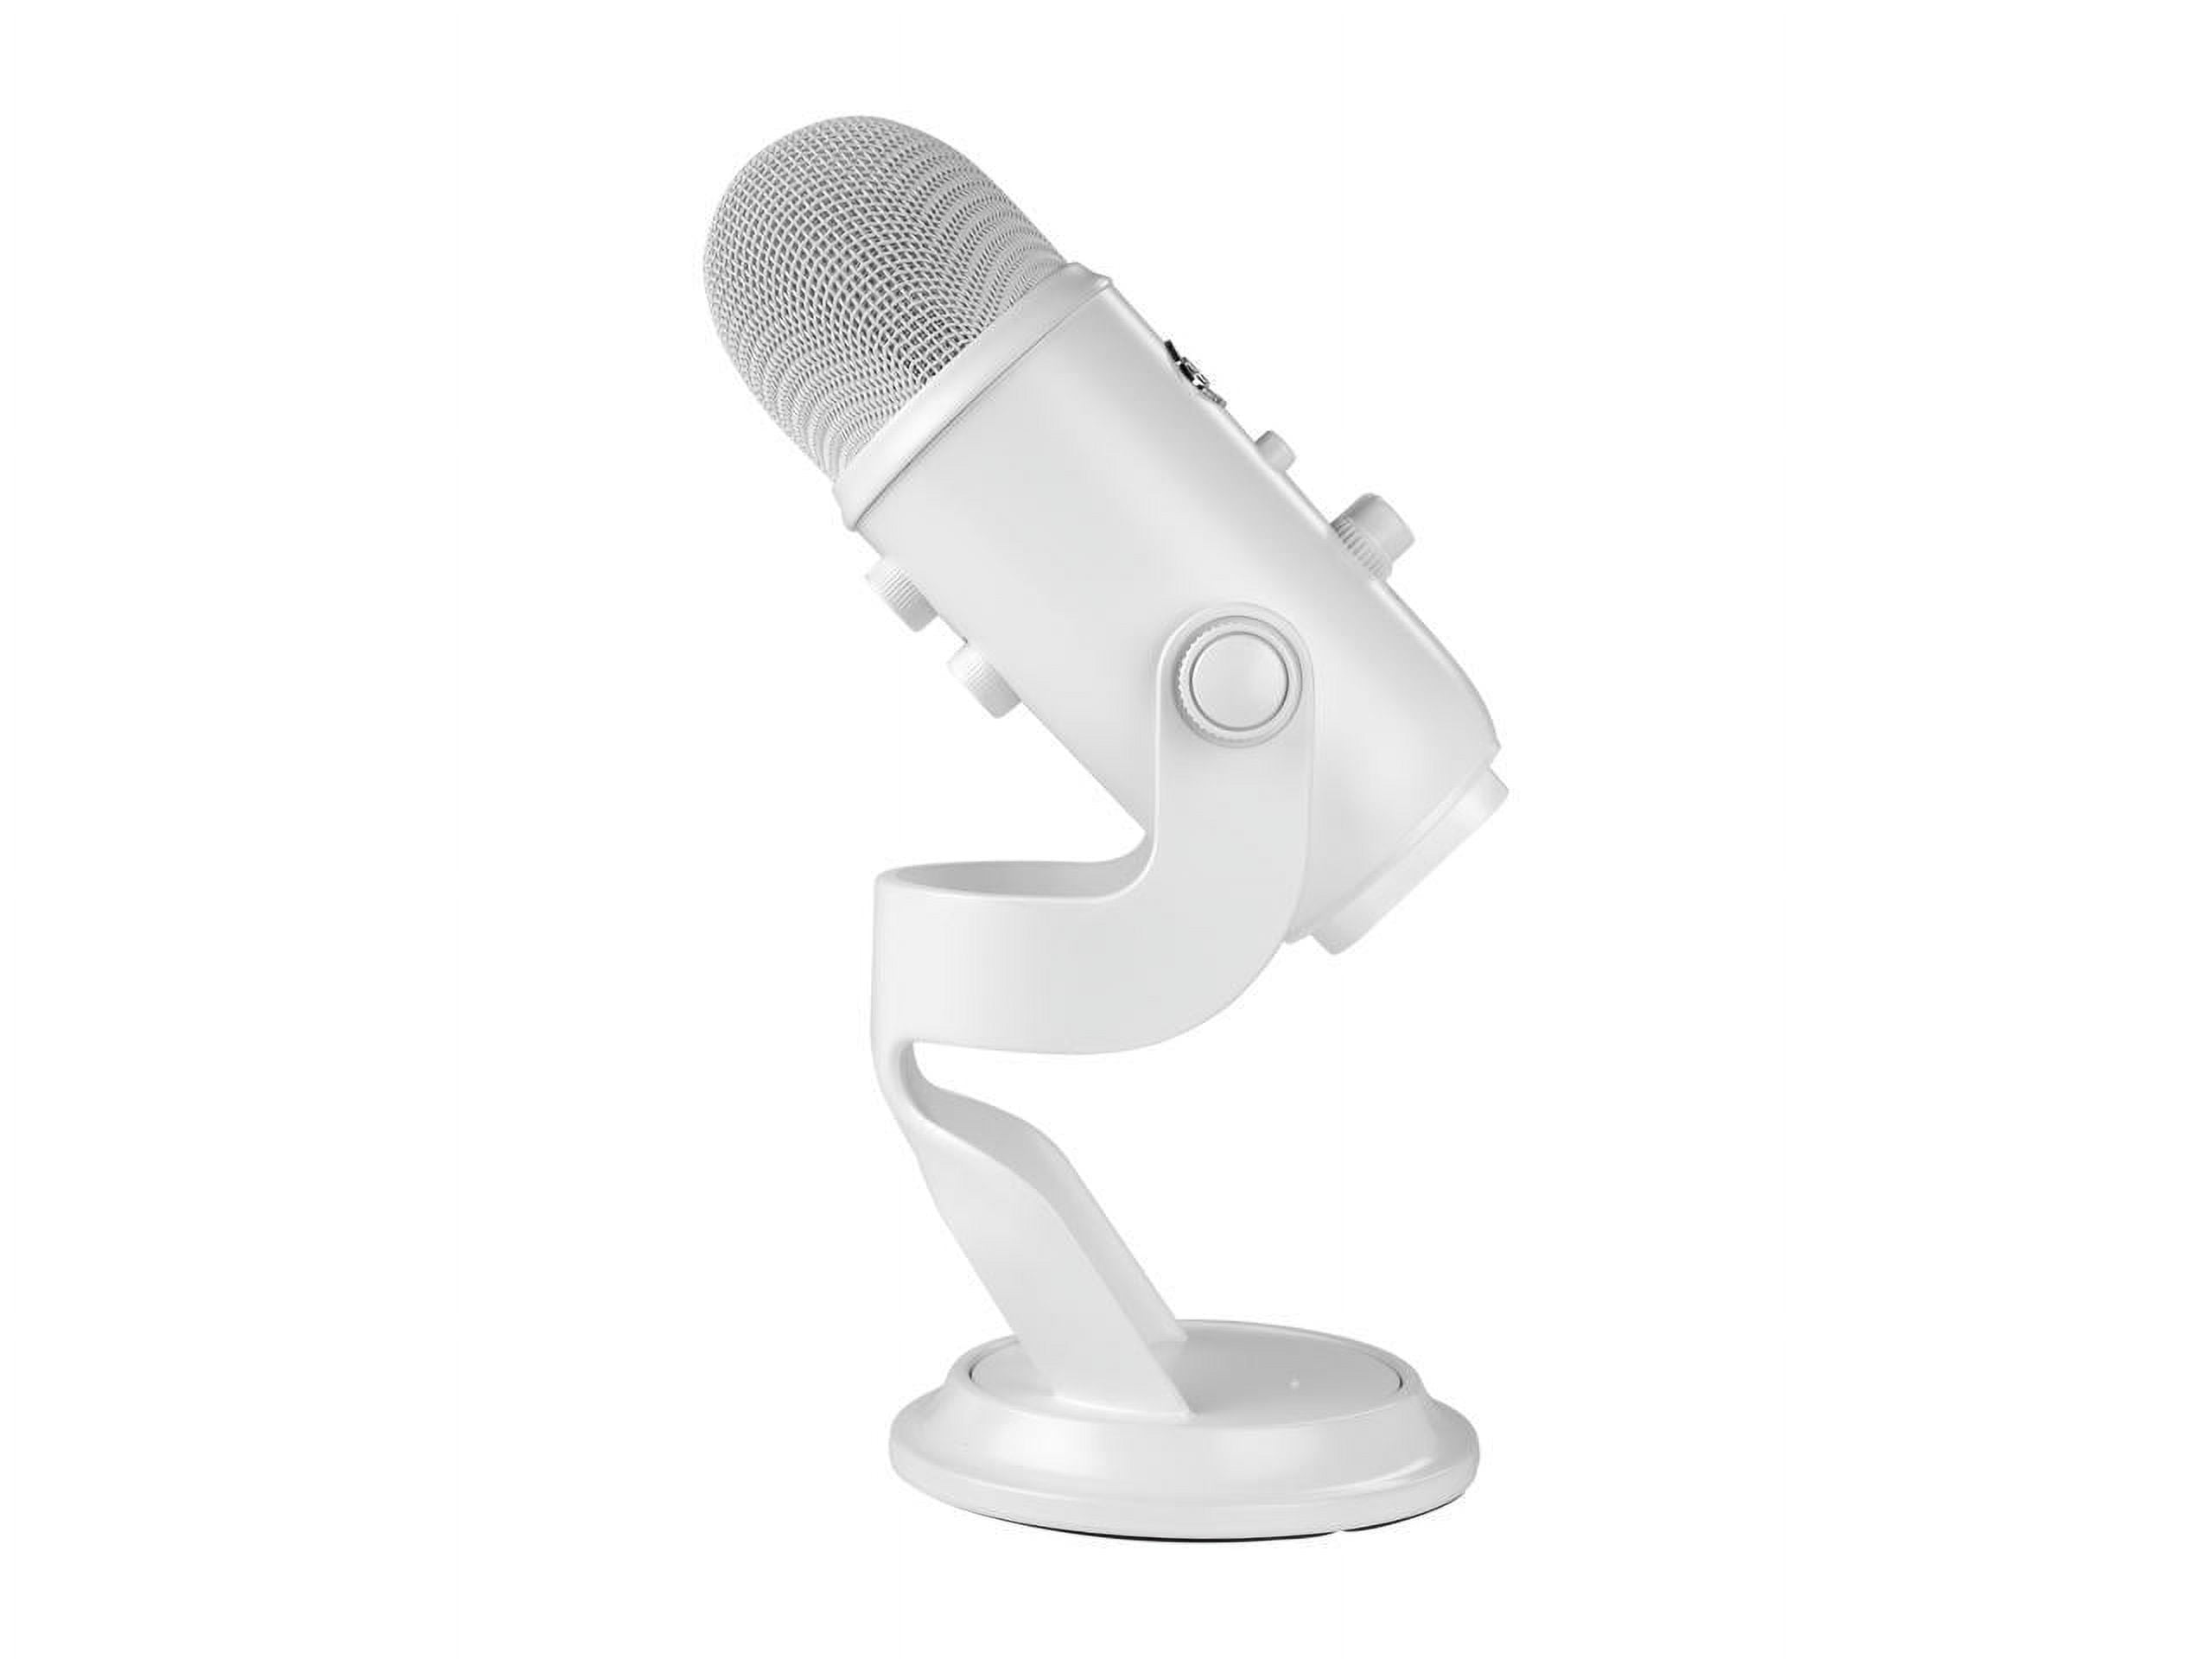 Blue Yeti USB Condenser Microphone - White; For Recording and Streaming;  Blue VO!CE effects; 4 Pickup Patterns - Micro Center